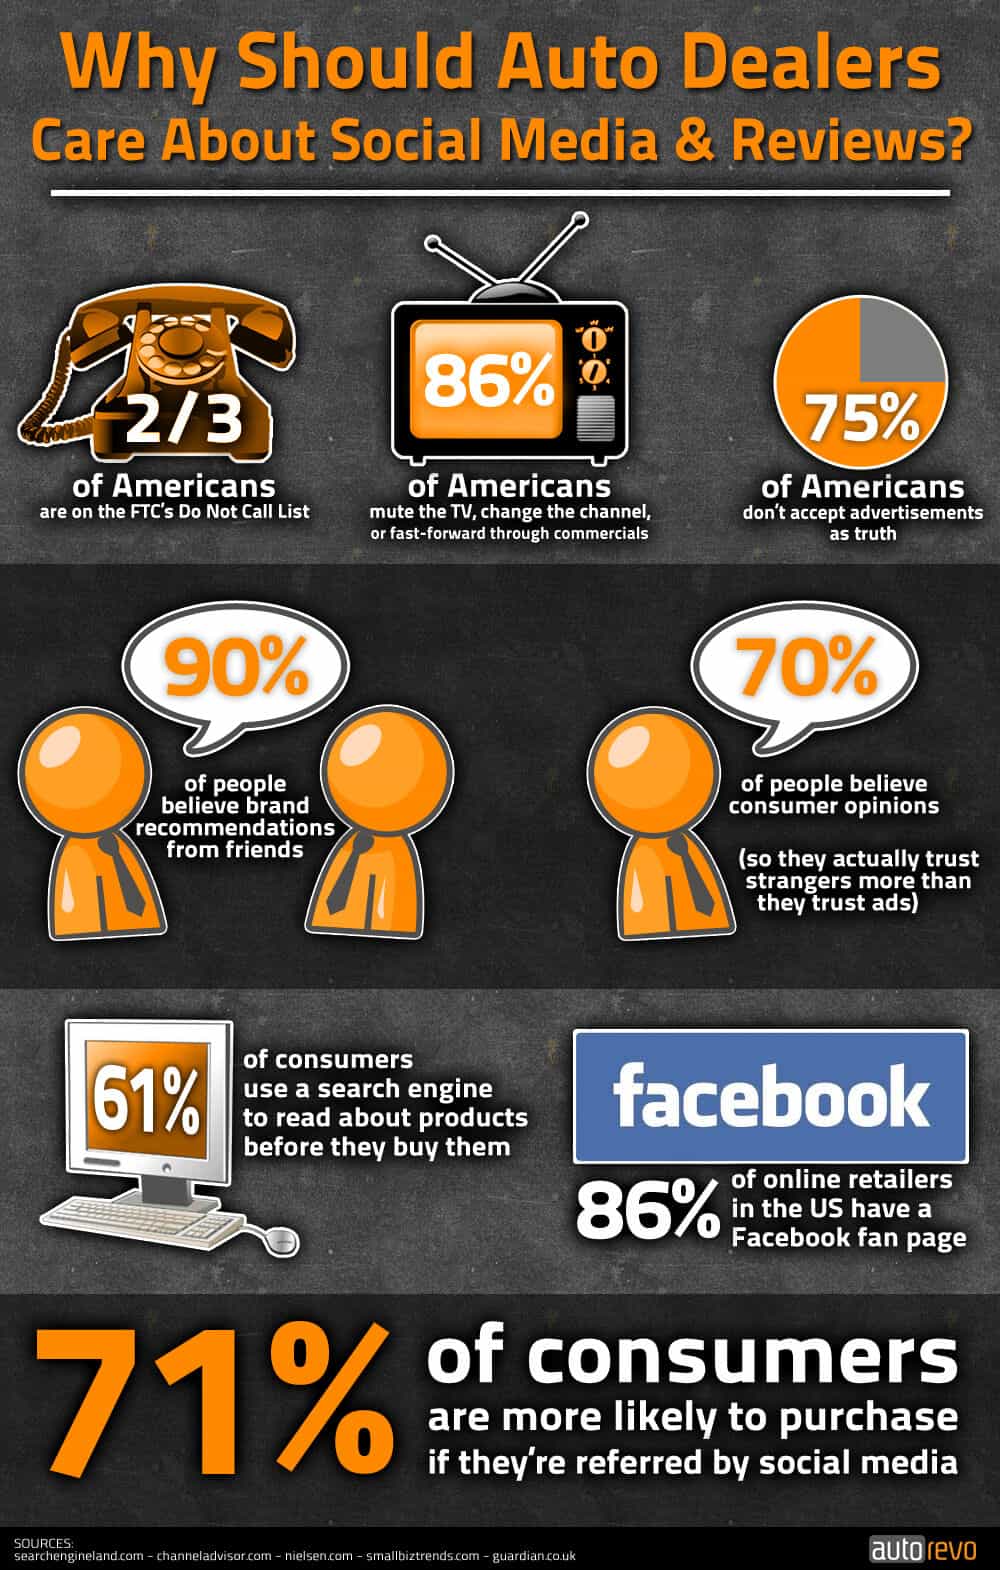 Why Should Auto Dealers Care About Social Media infographic